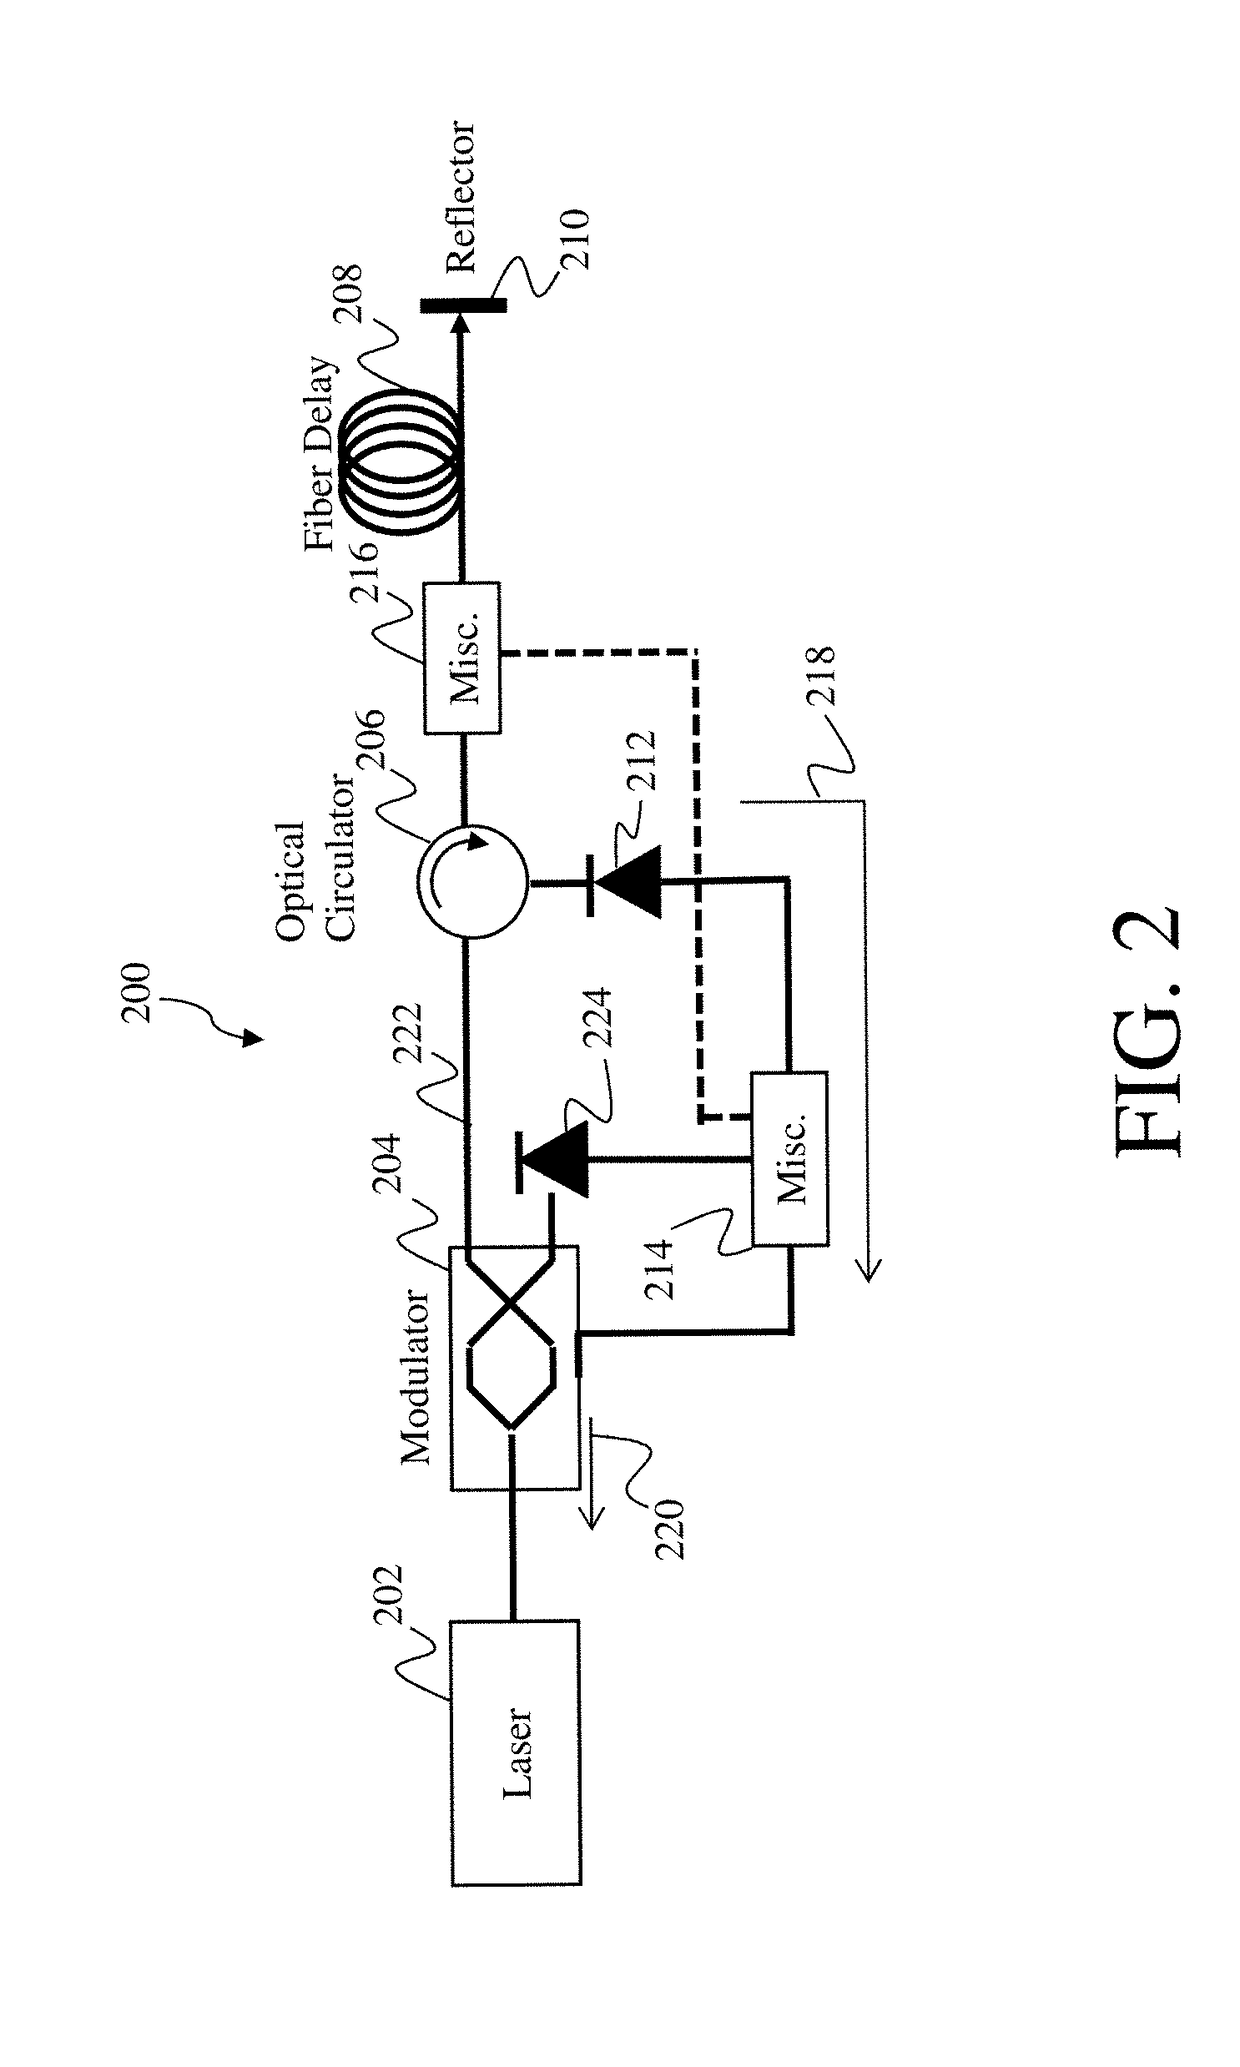 Methods and systems for reducing noise in optoelectronic oscillators